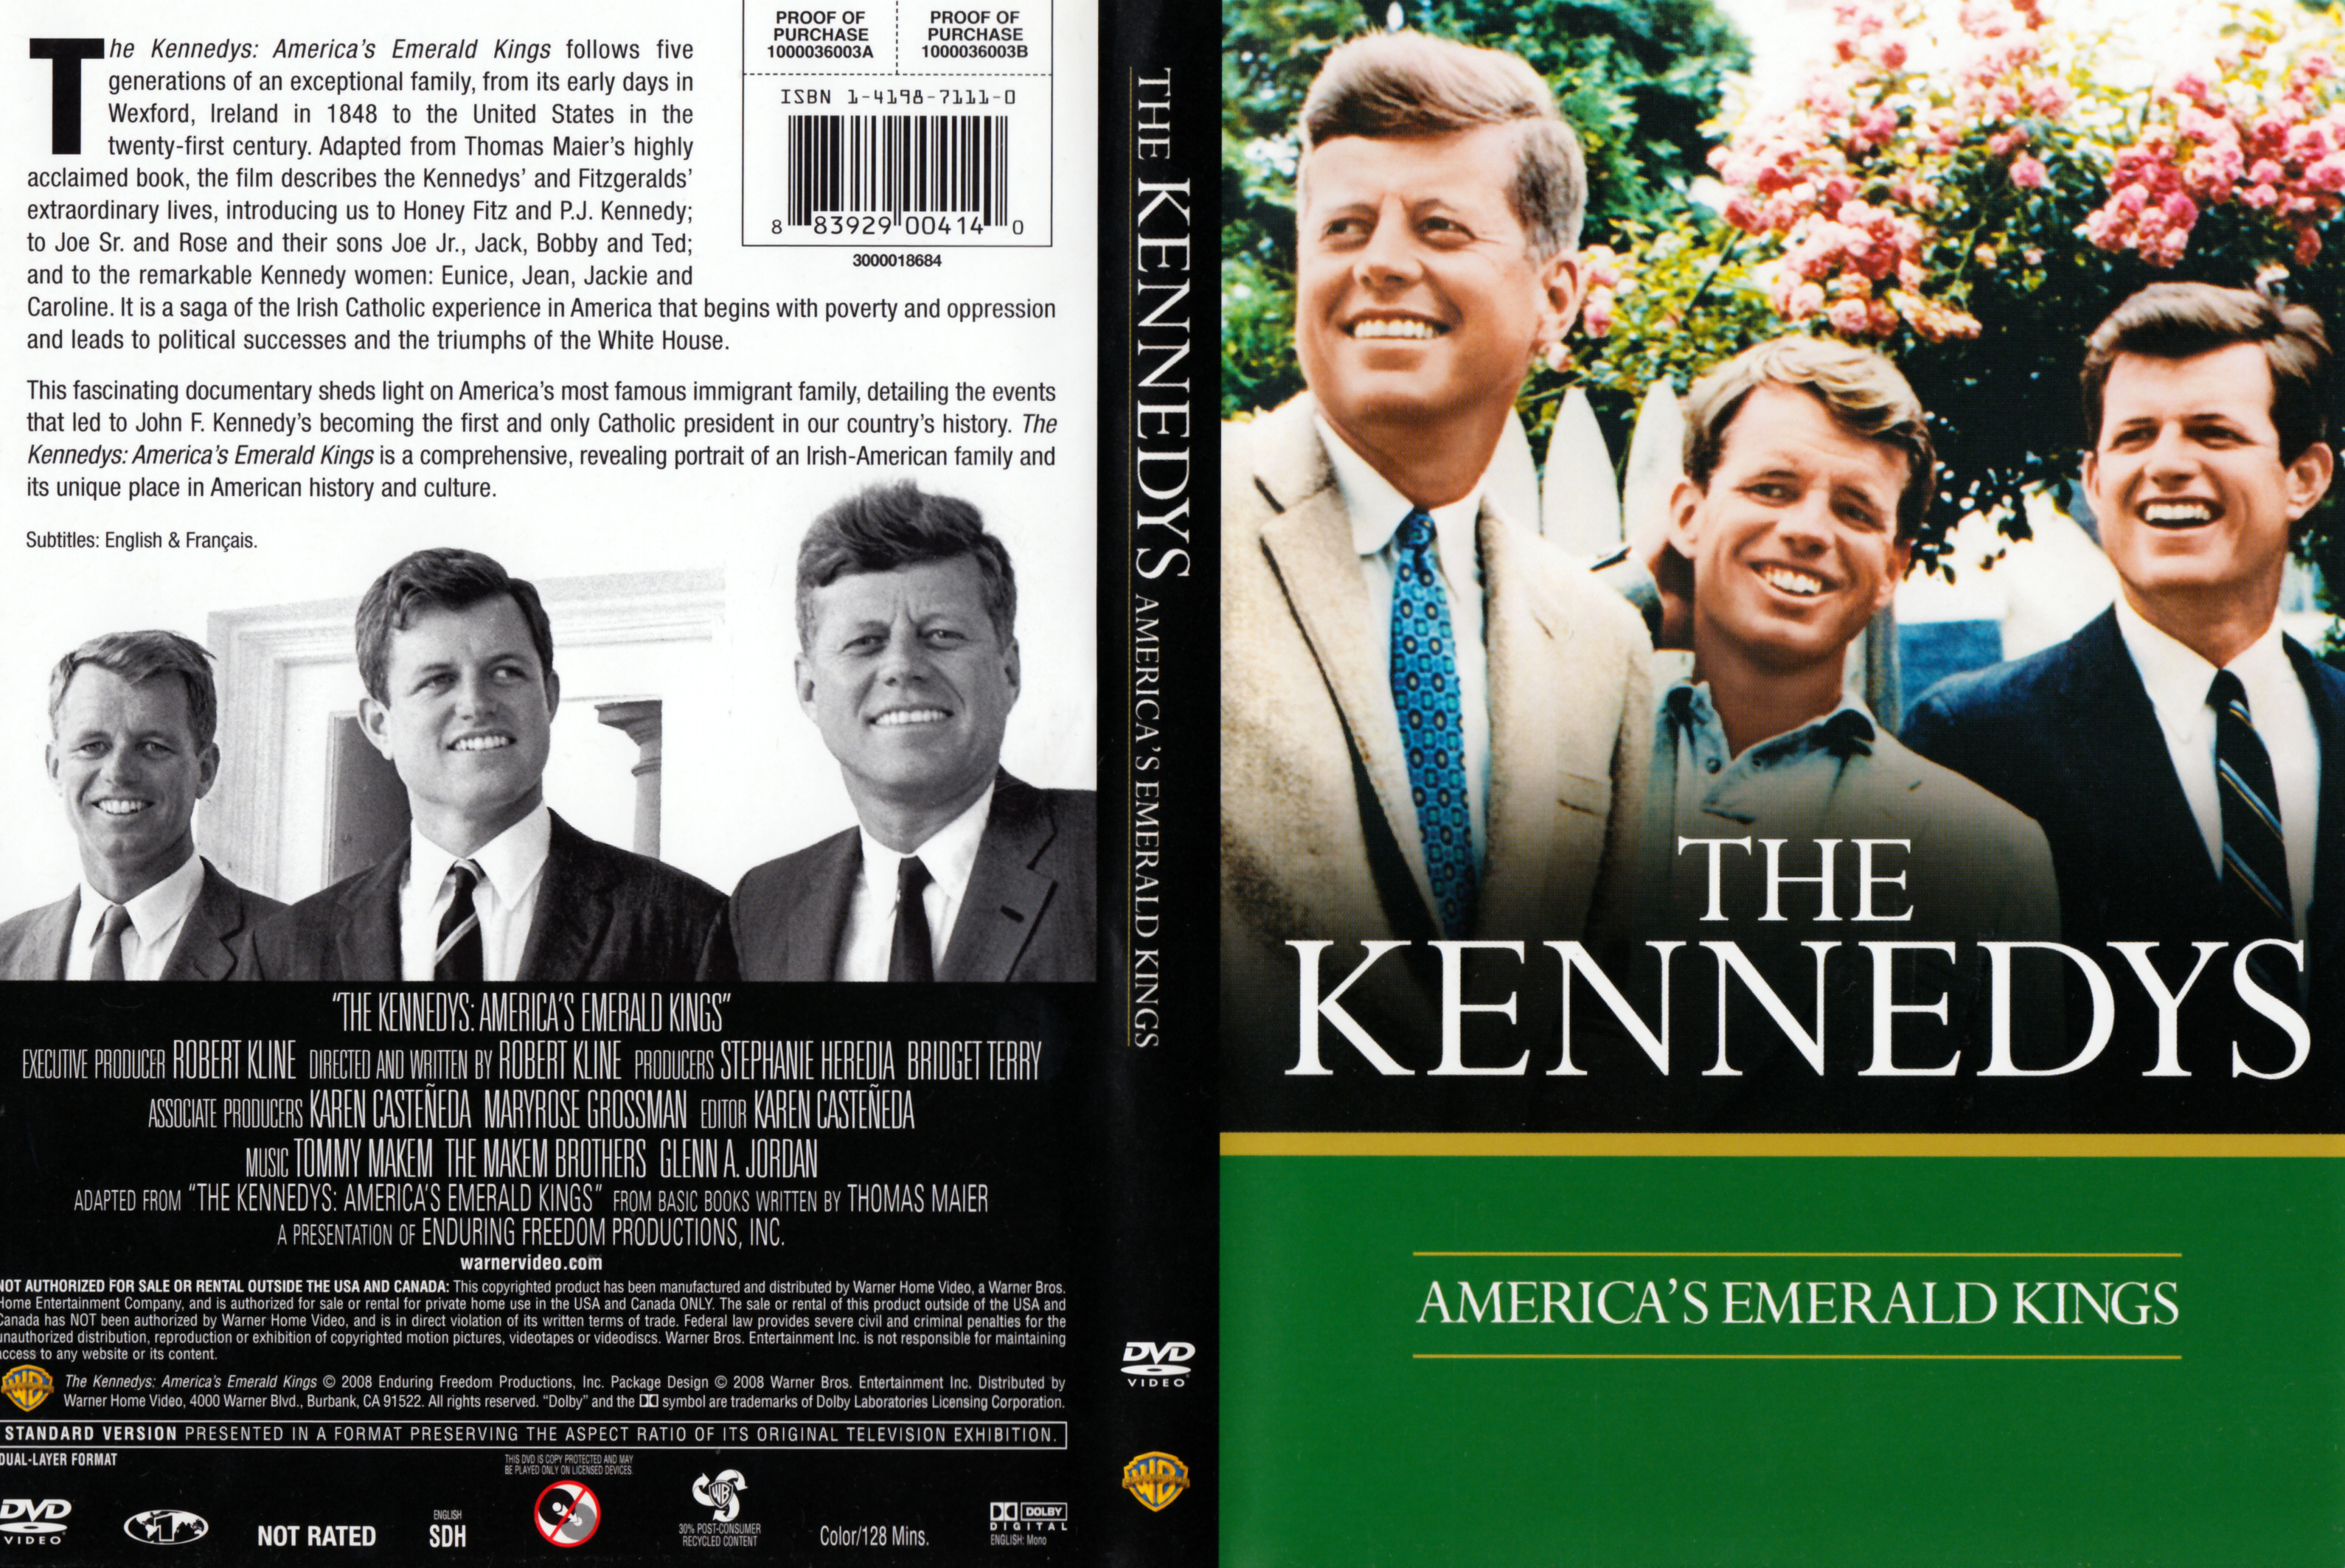 Jaquette DVD The Kennedys - America